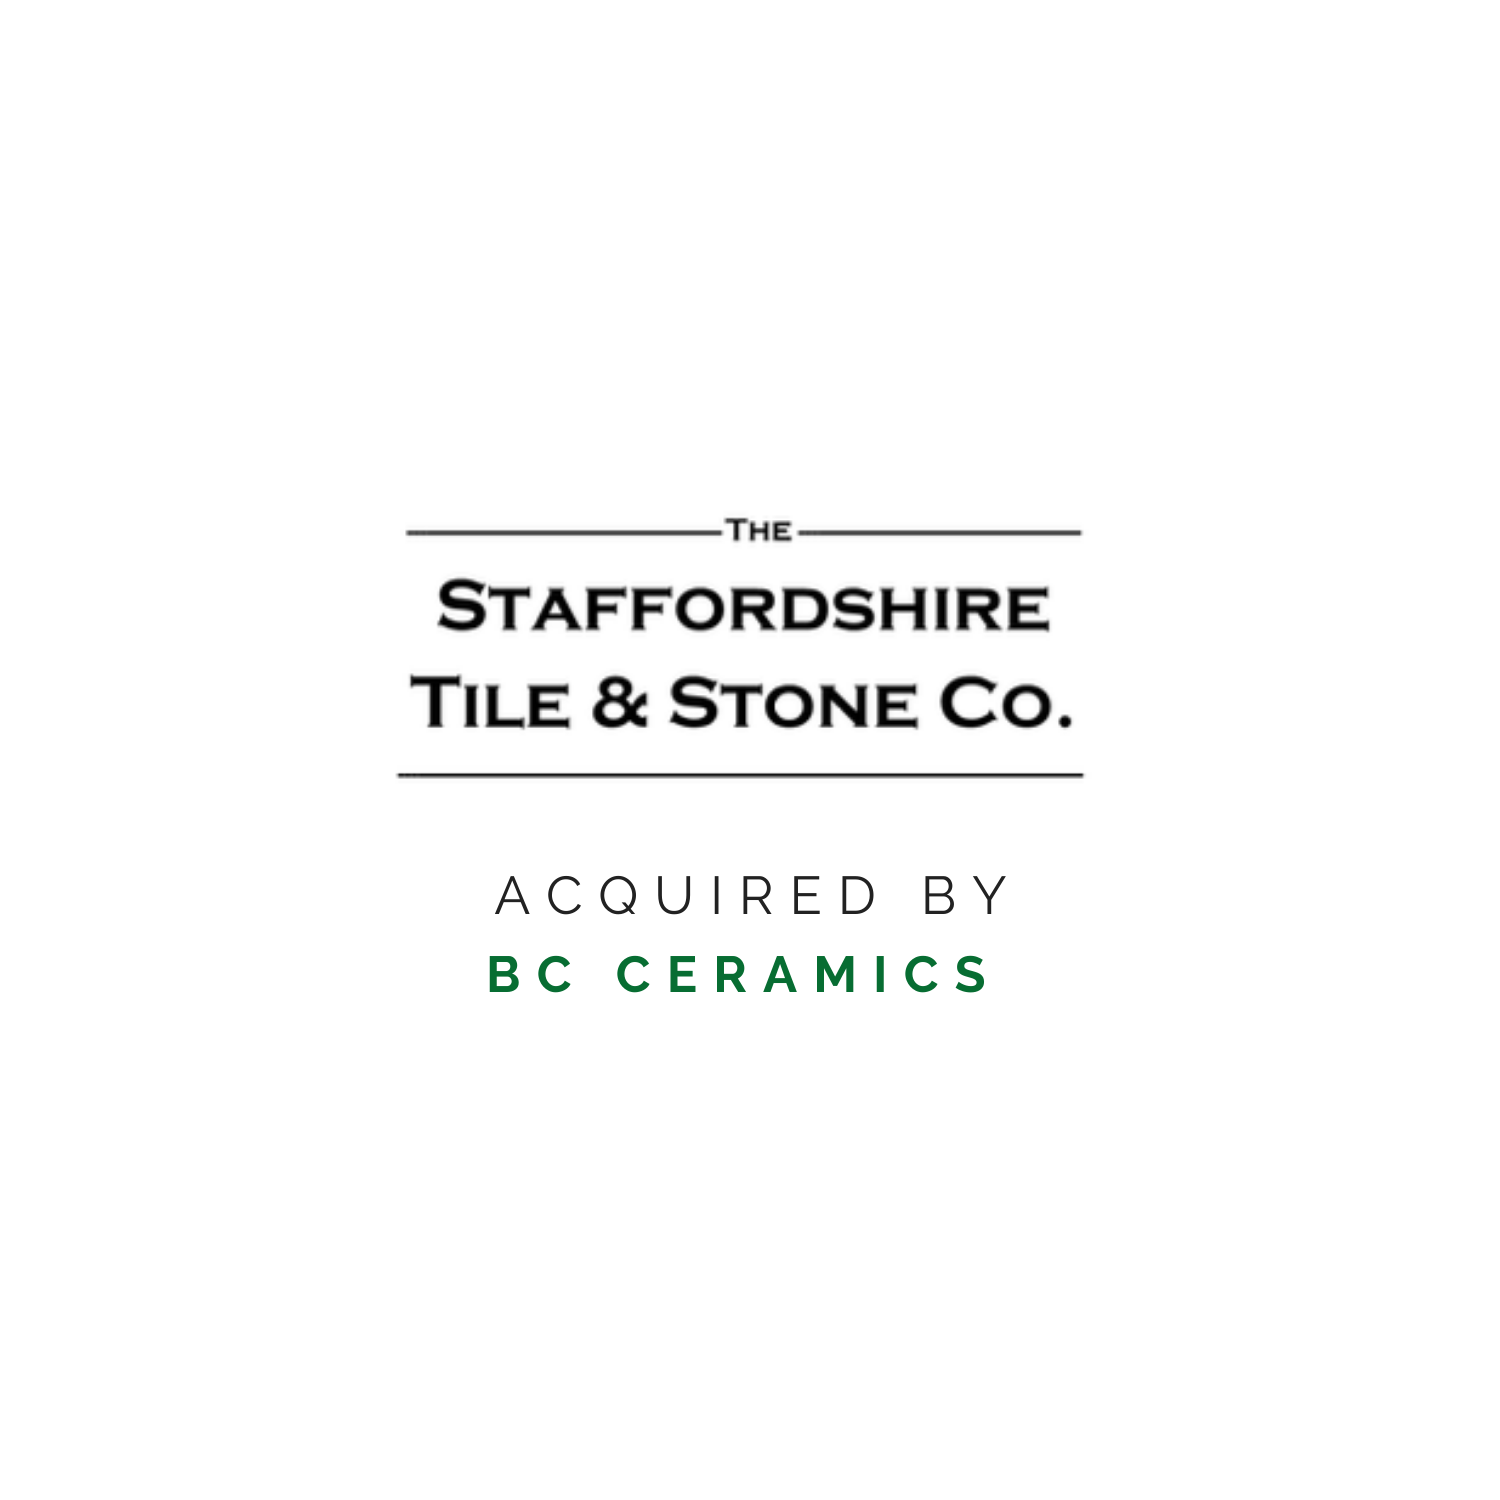 Sale of Wholesaler Distributor of Tile and Stone